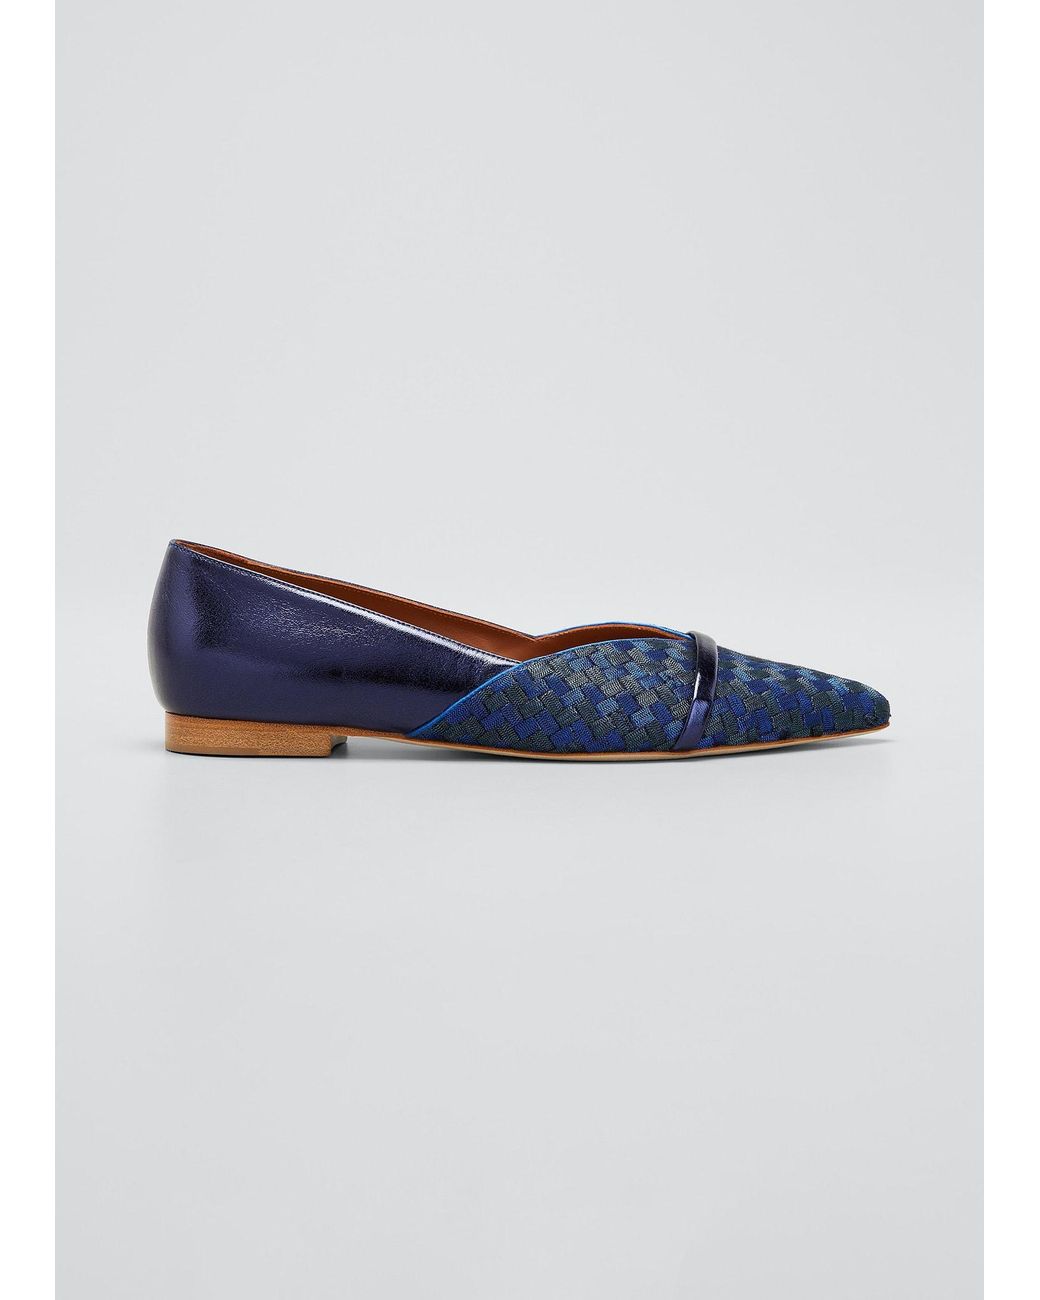 Malone Souliers Colette Woven Satin Ballerina Flats in Blue | Lyst